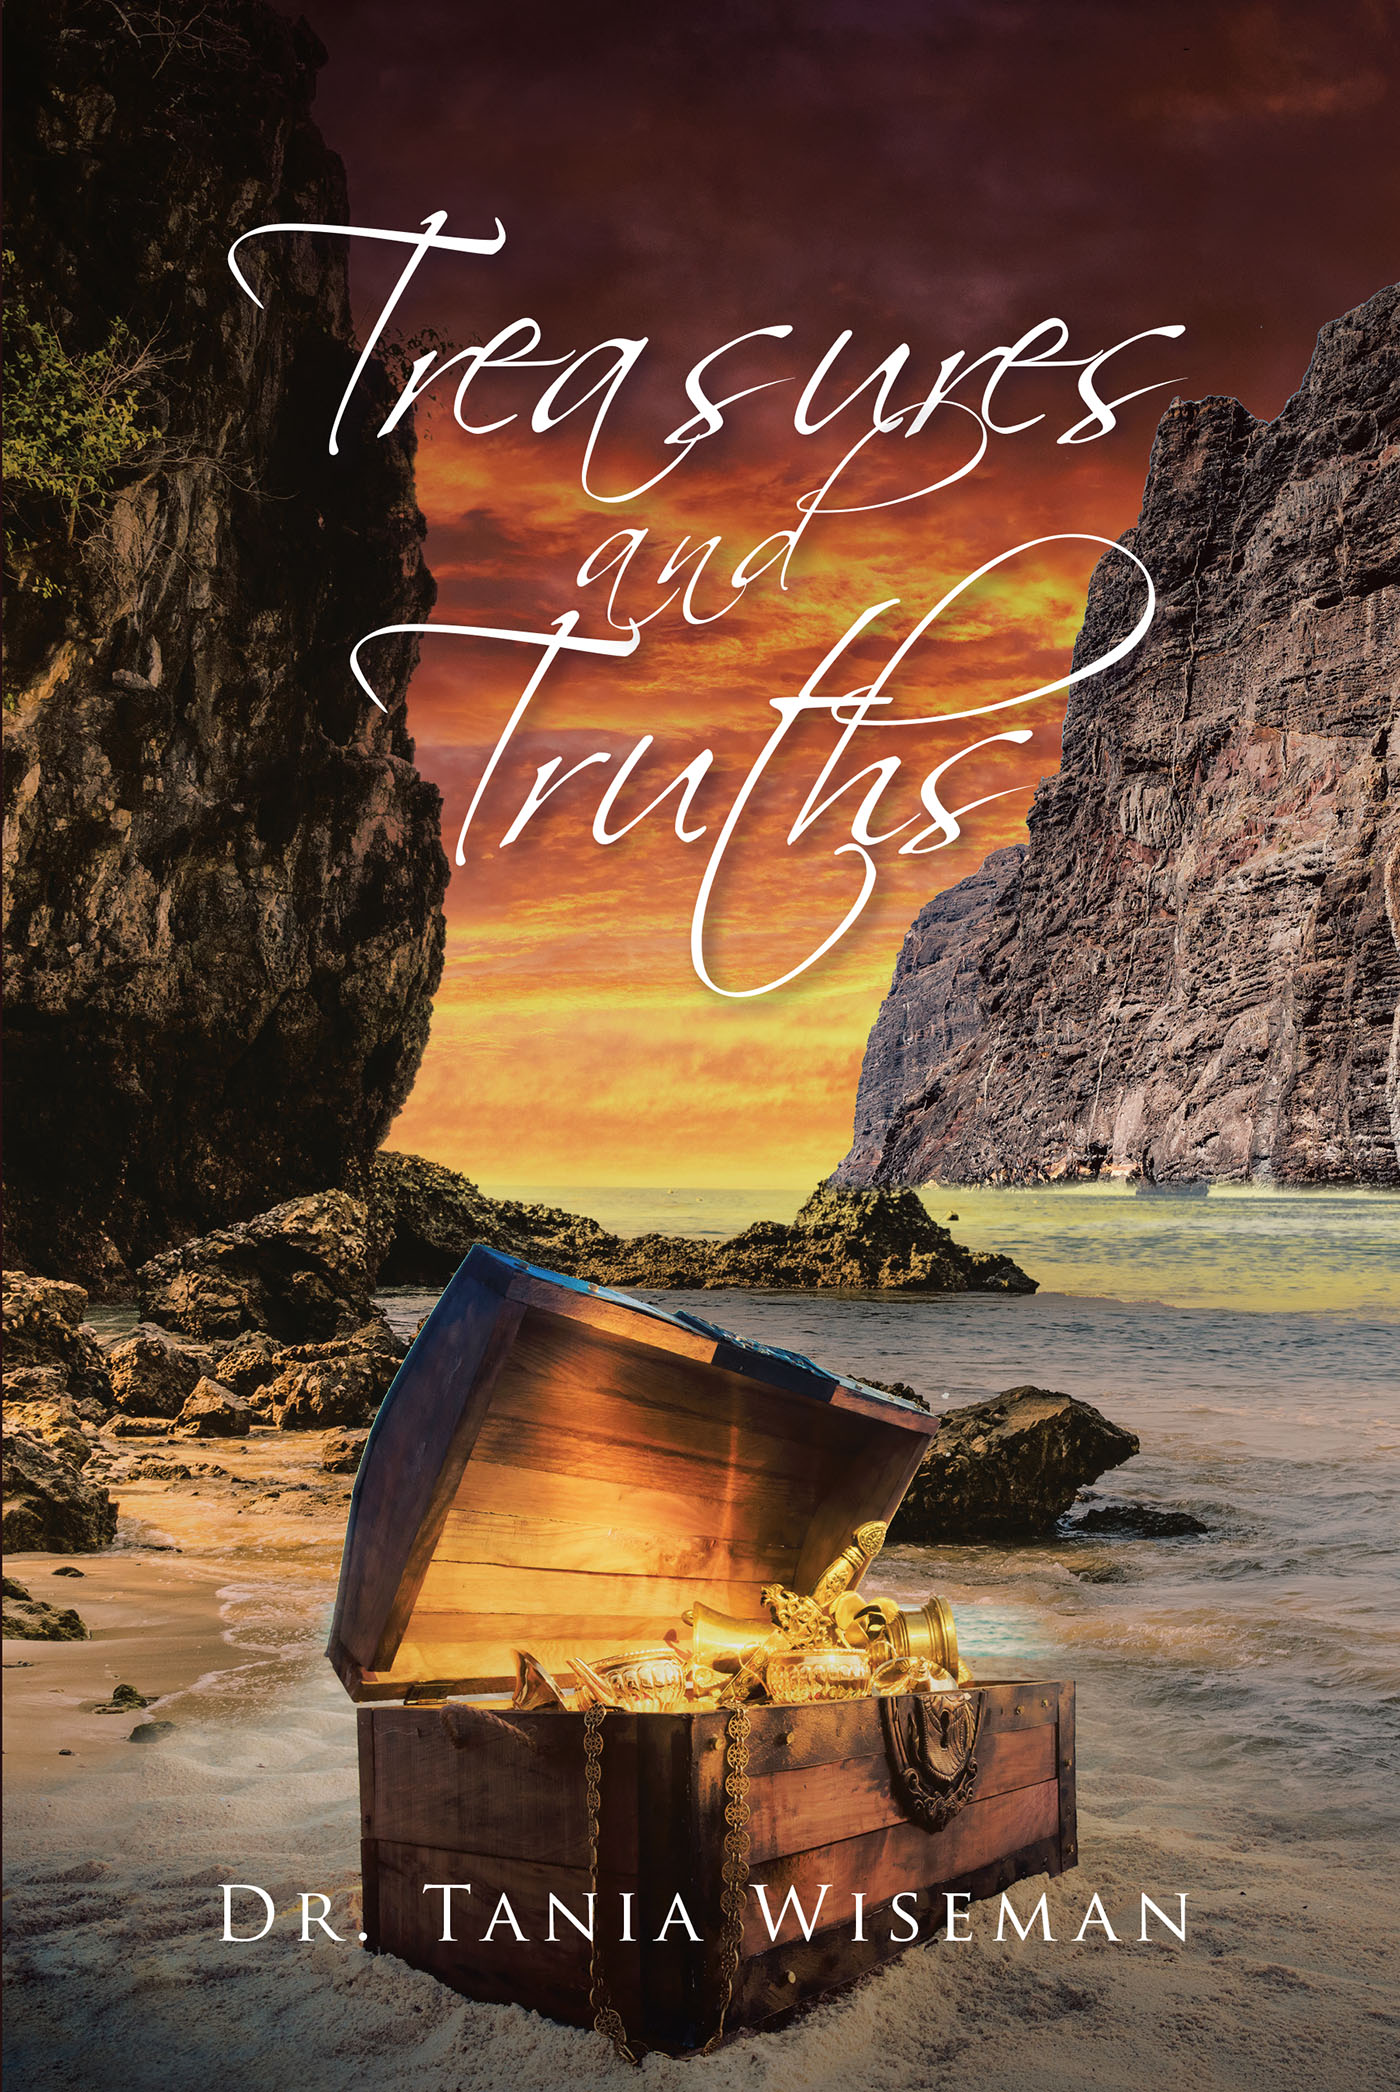 Dr. Tania Wiseman’s Newly Released "Treasures and Truths" is an Inspiring Exploration of Key Lessons Found Within Scripture and How to Apply It to One’s Life